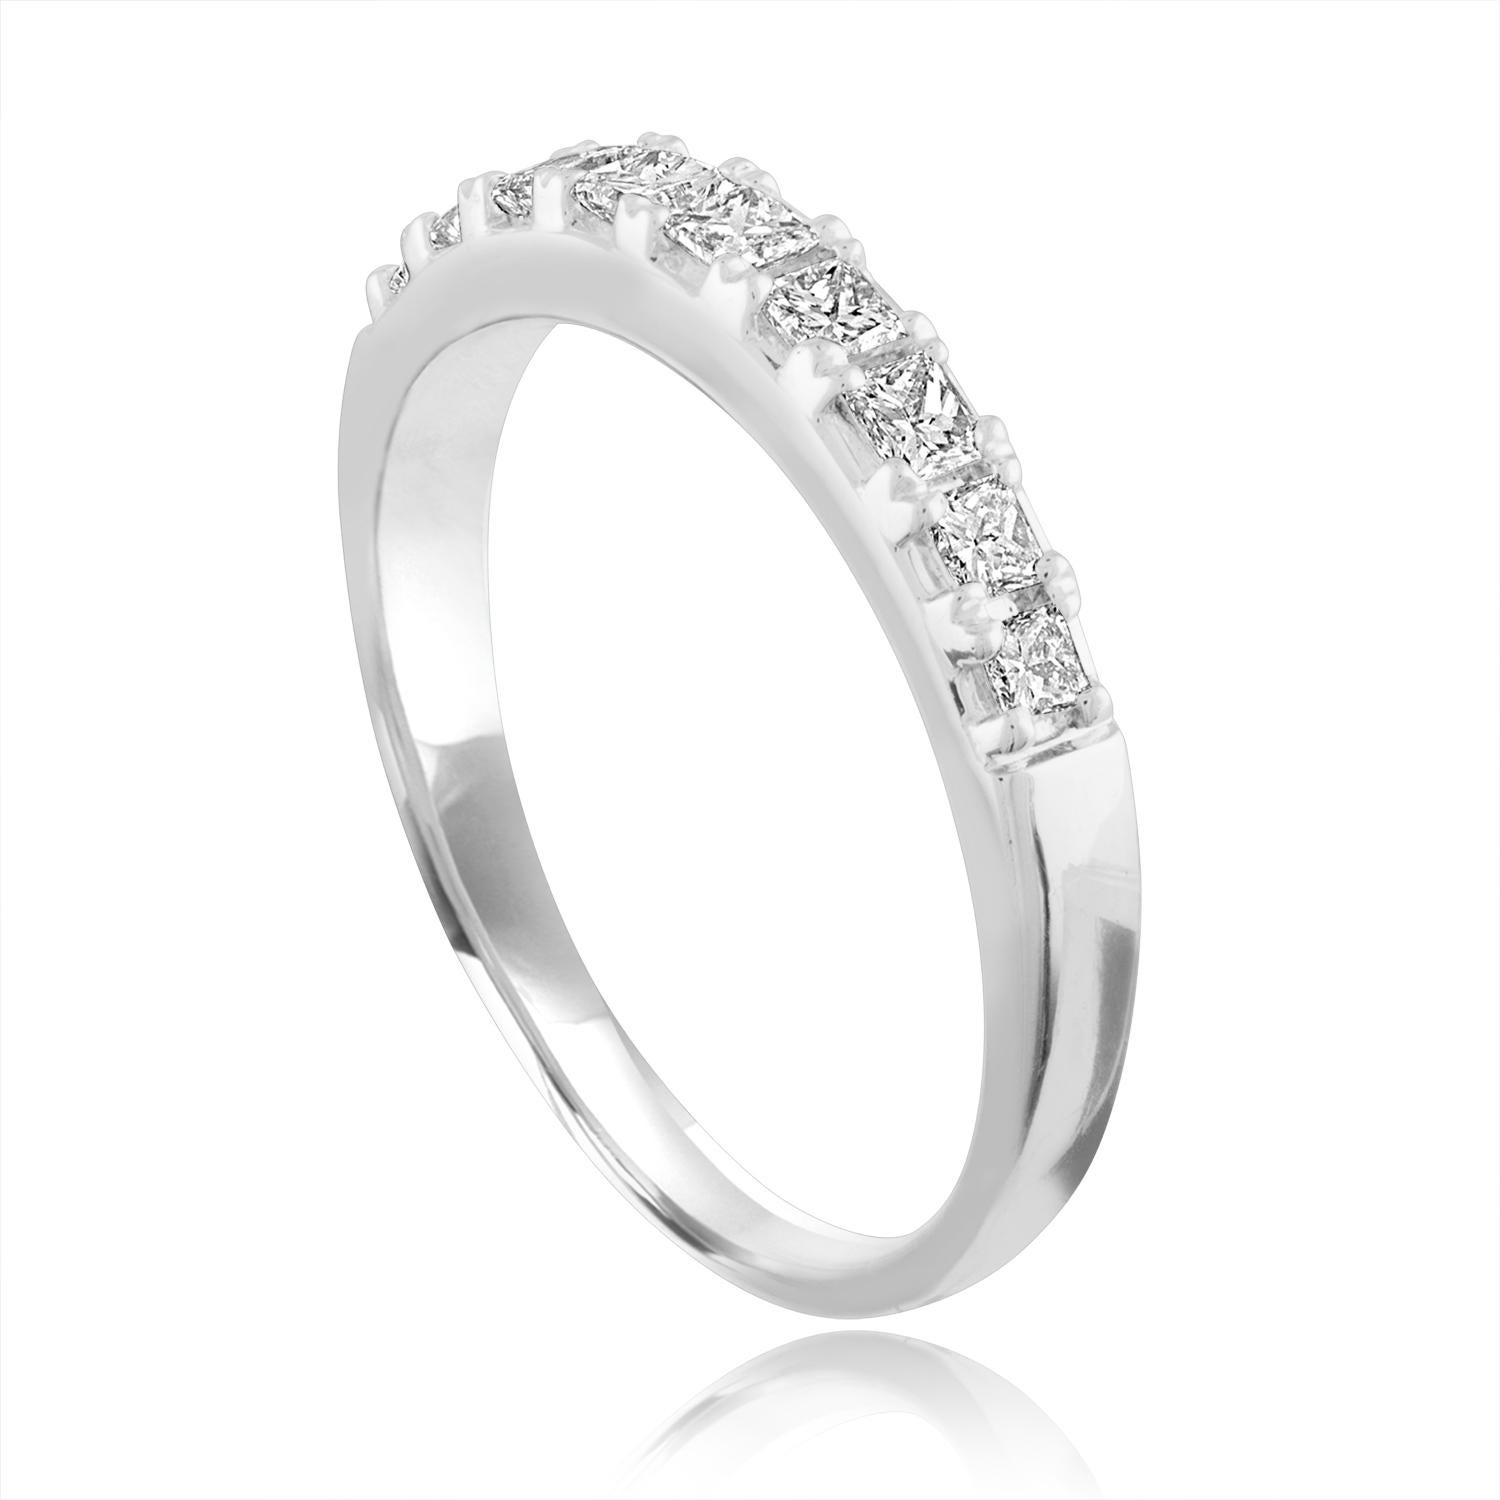 Very Classic Wedding Band
The Nine Stone Band is 18K White Gold
There are 0.51 Carats In Diamonds F/G VS/SI
The ring is a size 6.75, sizable.
The ring weighs 3.2 grams